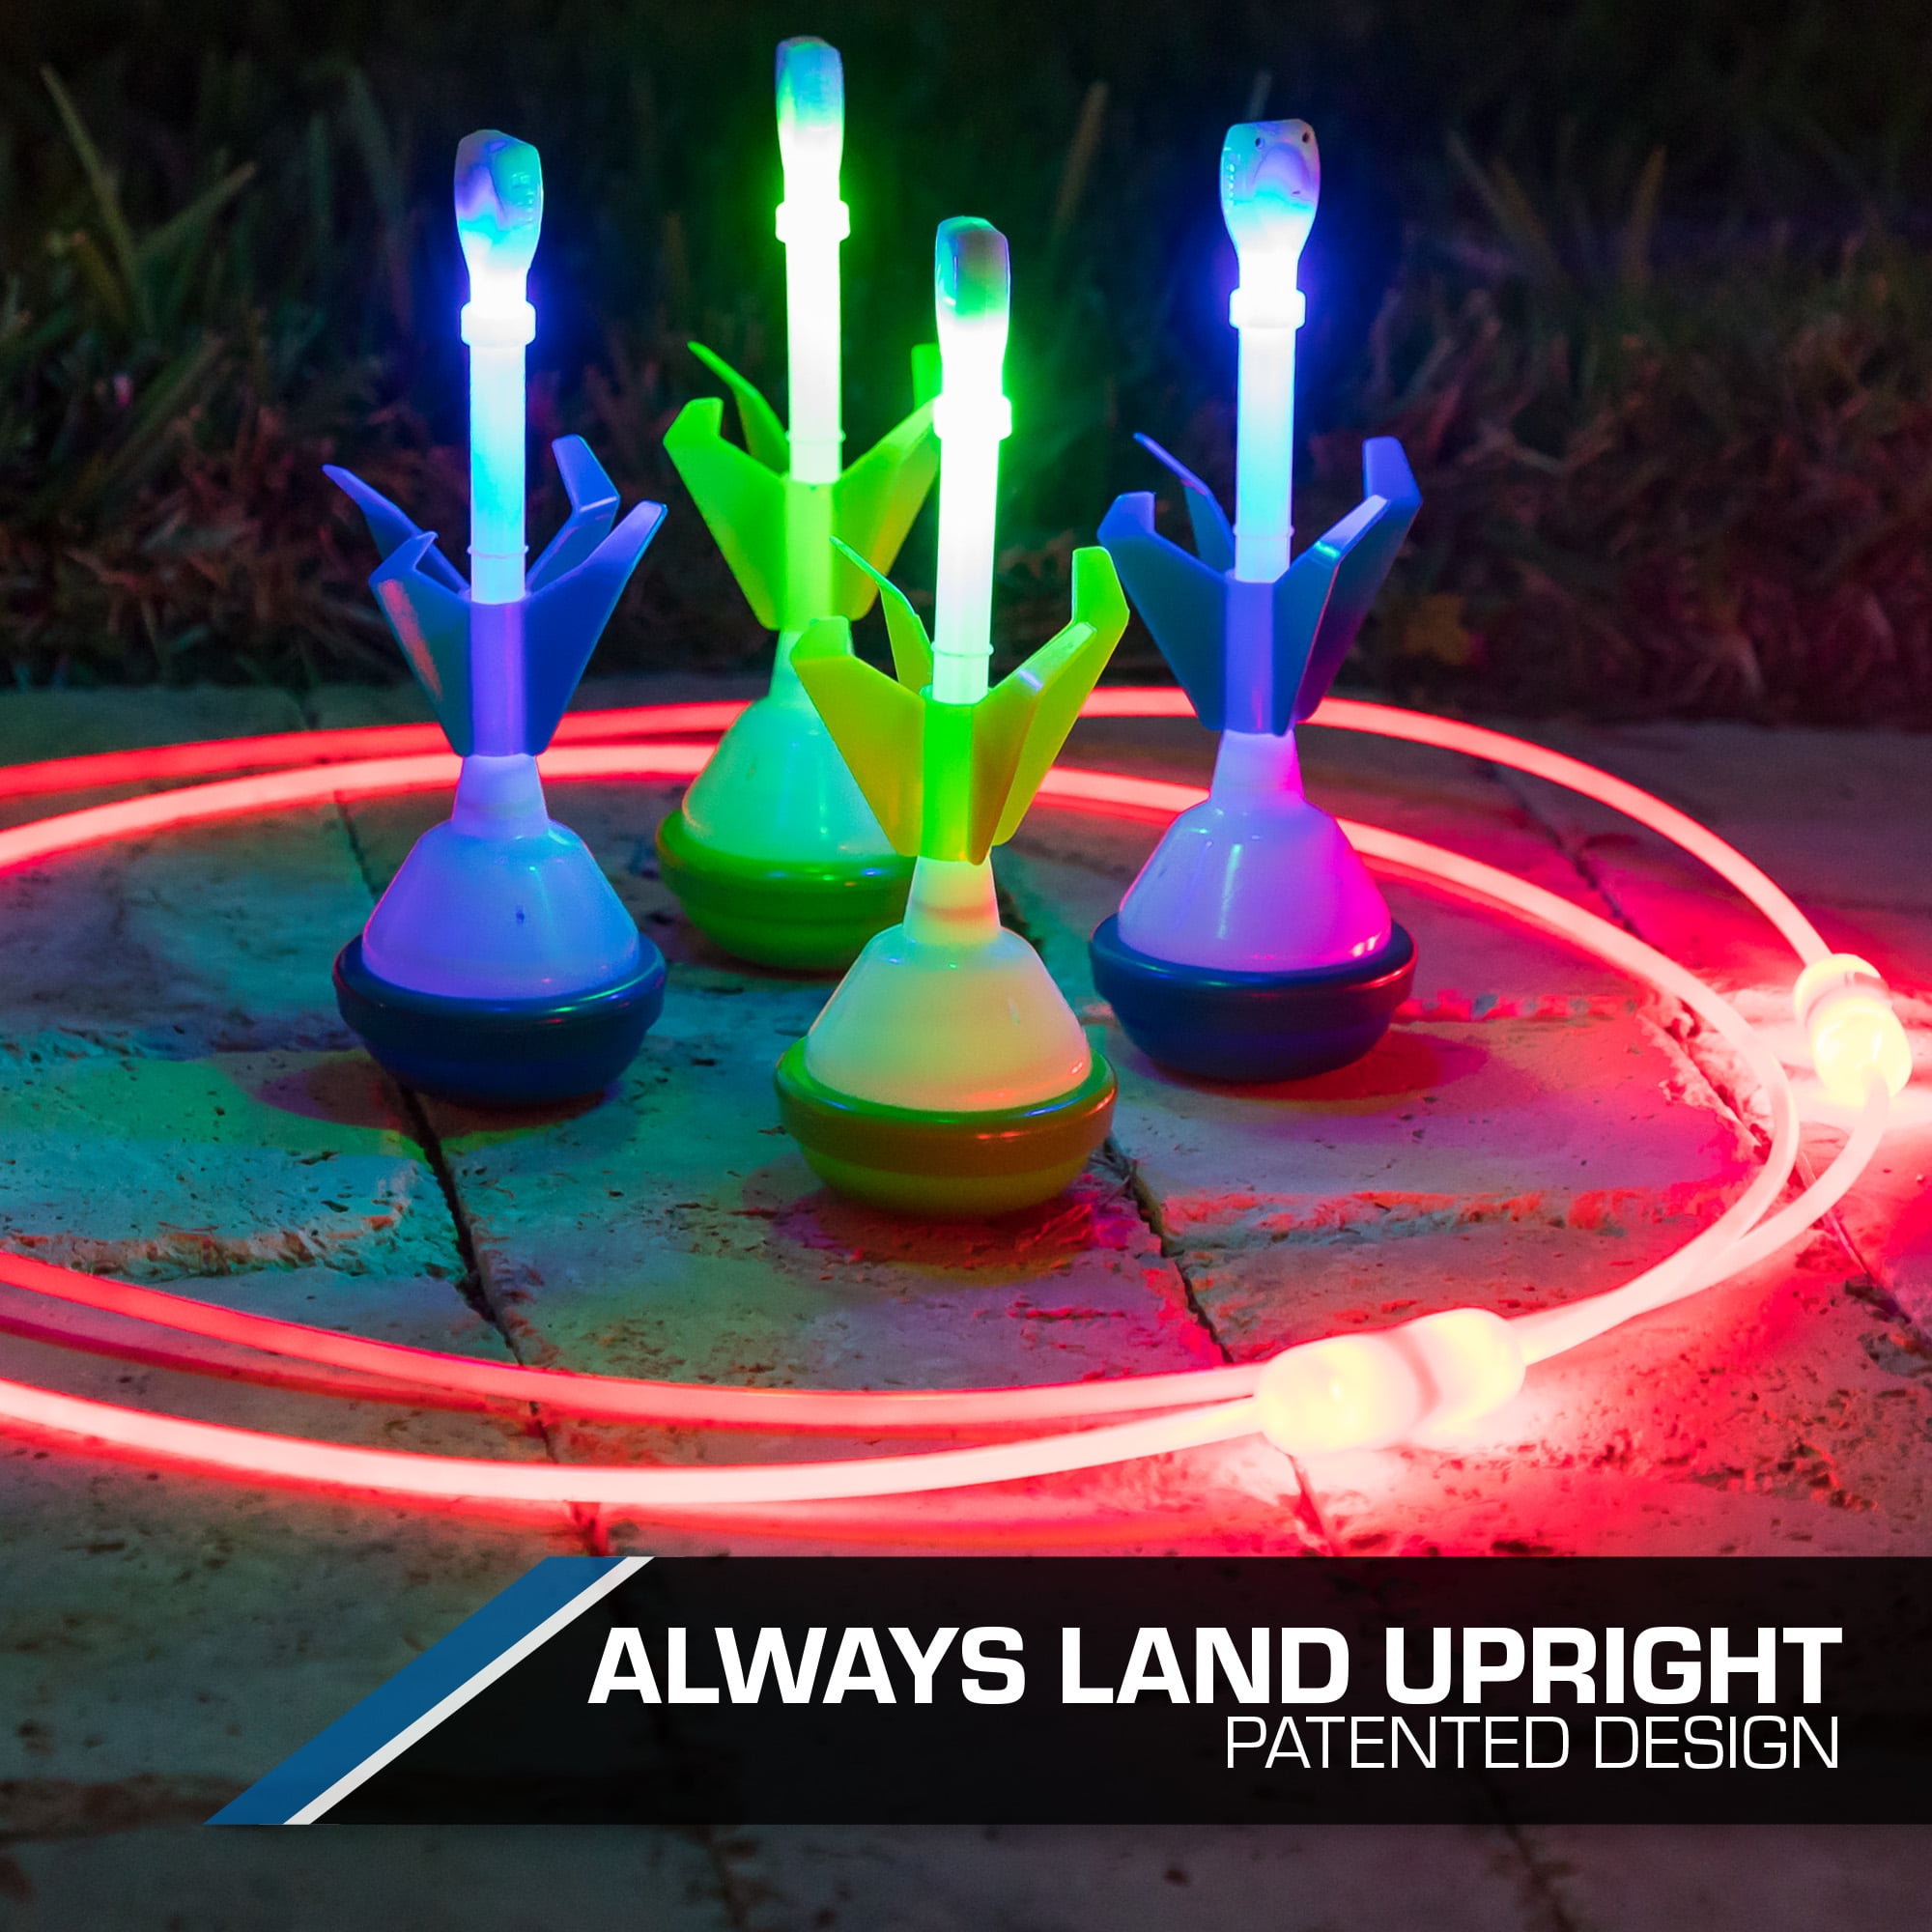 Funsparks Glow in The Dark Lawn Darts Similar to Horseshoes Toss Games LD1000 for sale online 